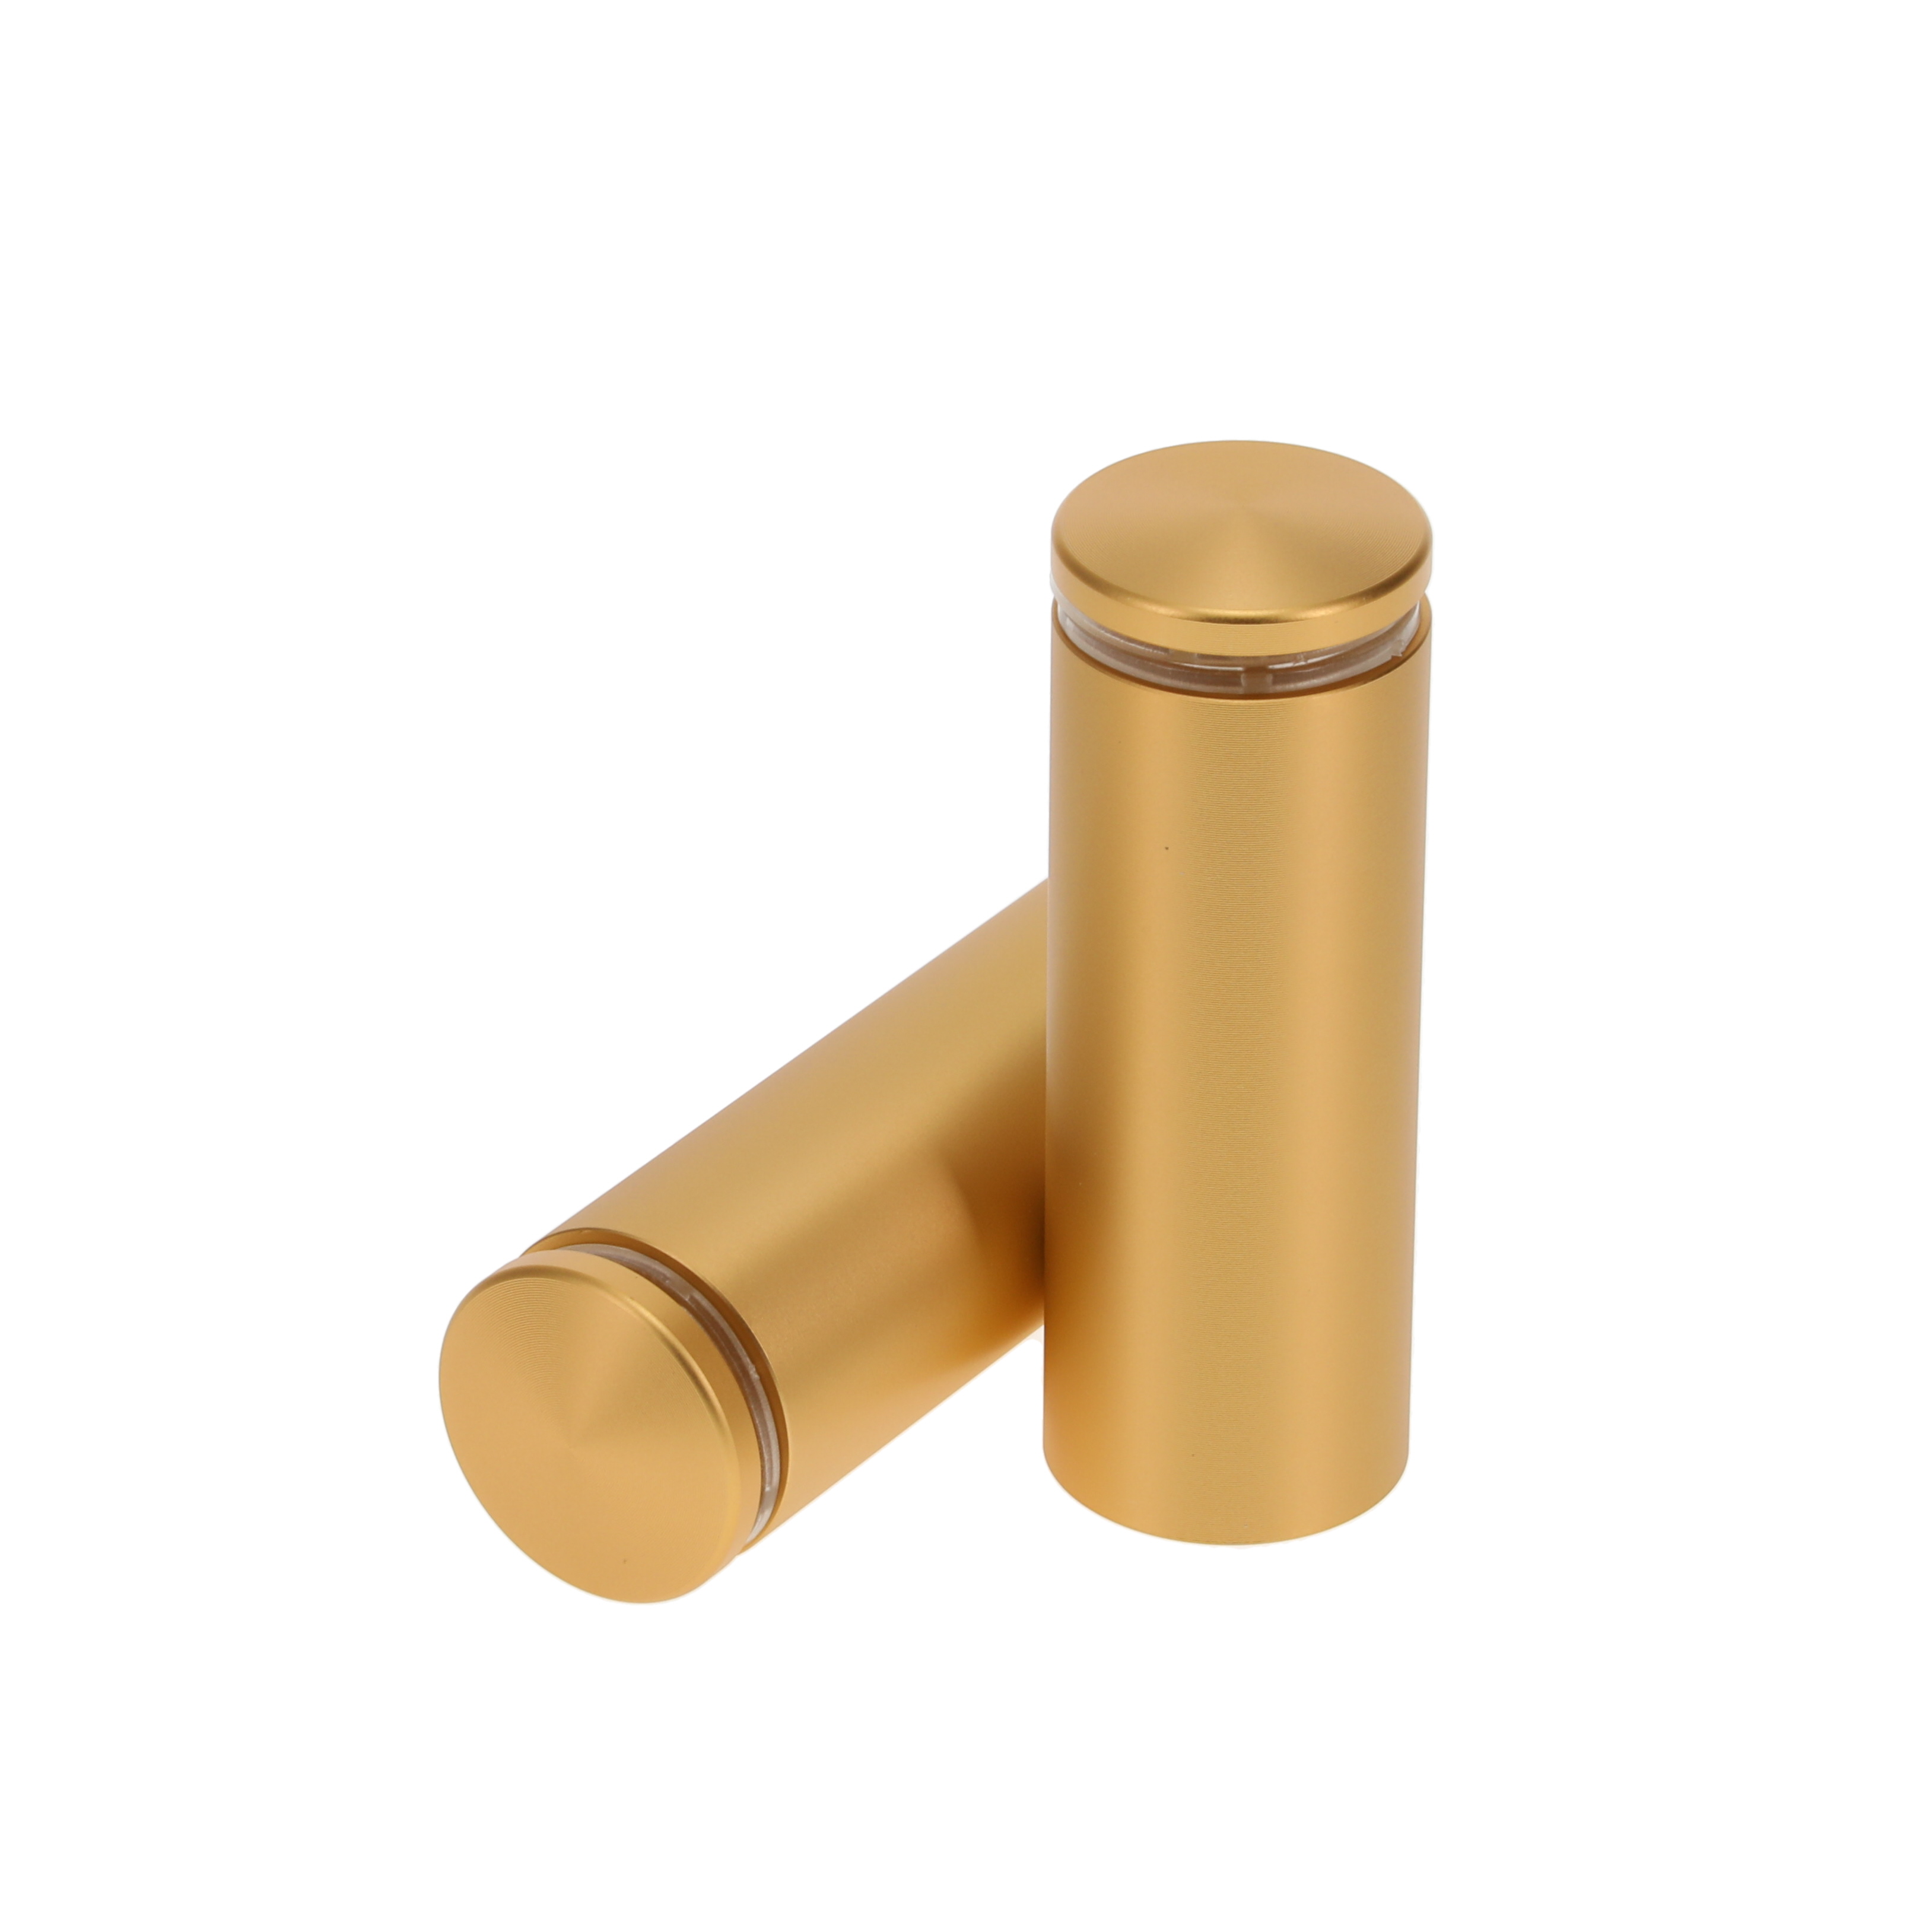 1'' Diameter X 2-1/2 Barrel Length, Aluminum Rounded Head Standoffs, Matte Champagne Anodized Finish Easy Fasten Standoff (For Inside / Outside use) [Required Material Hole Size: 7/16'']